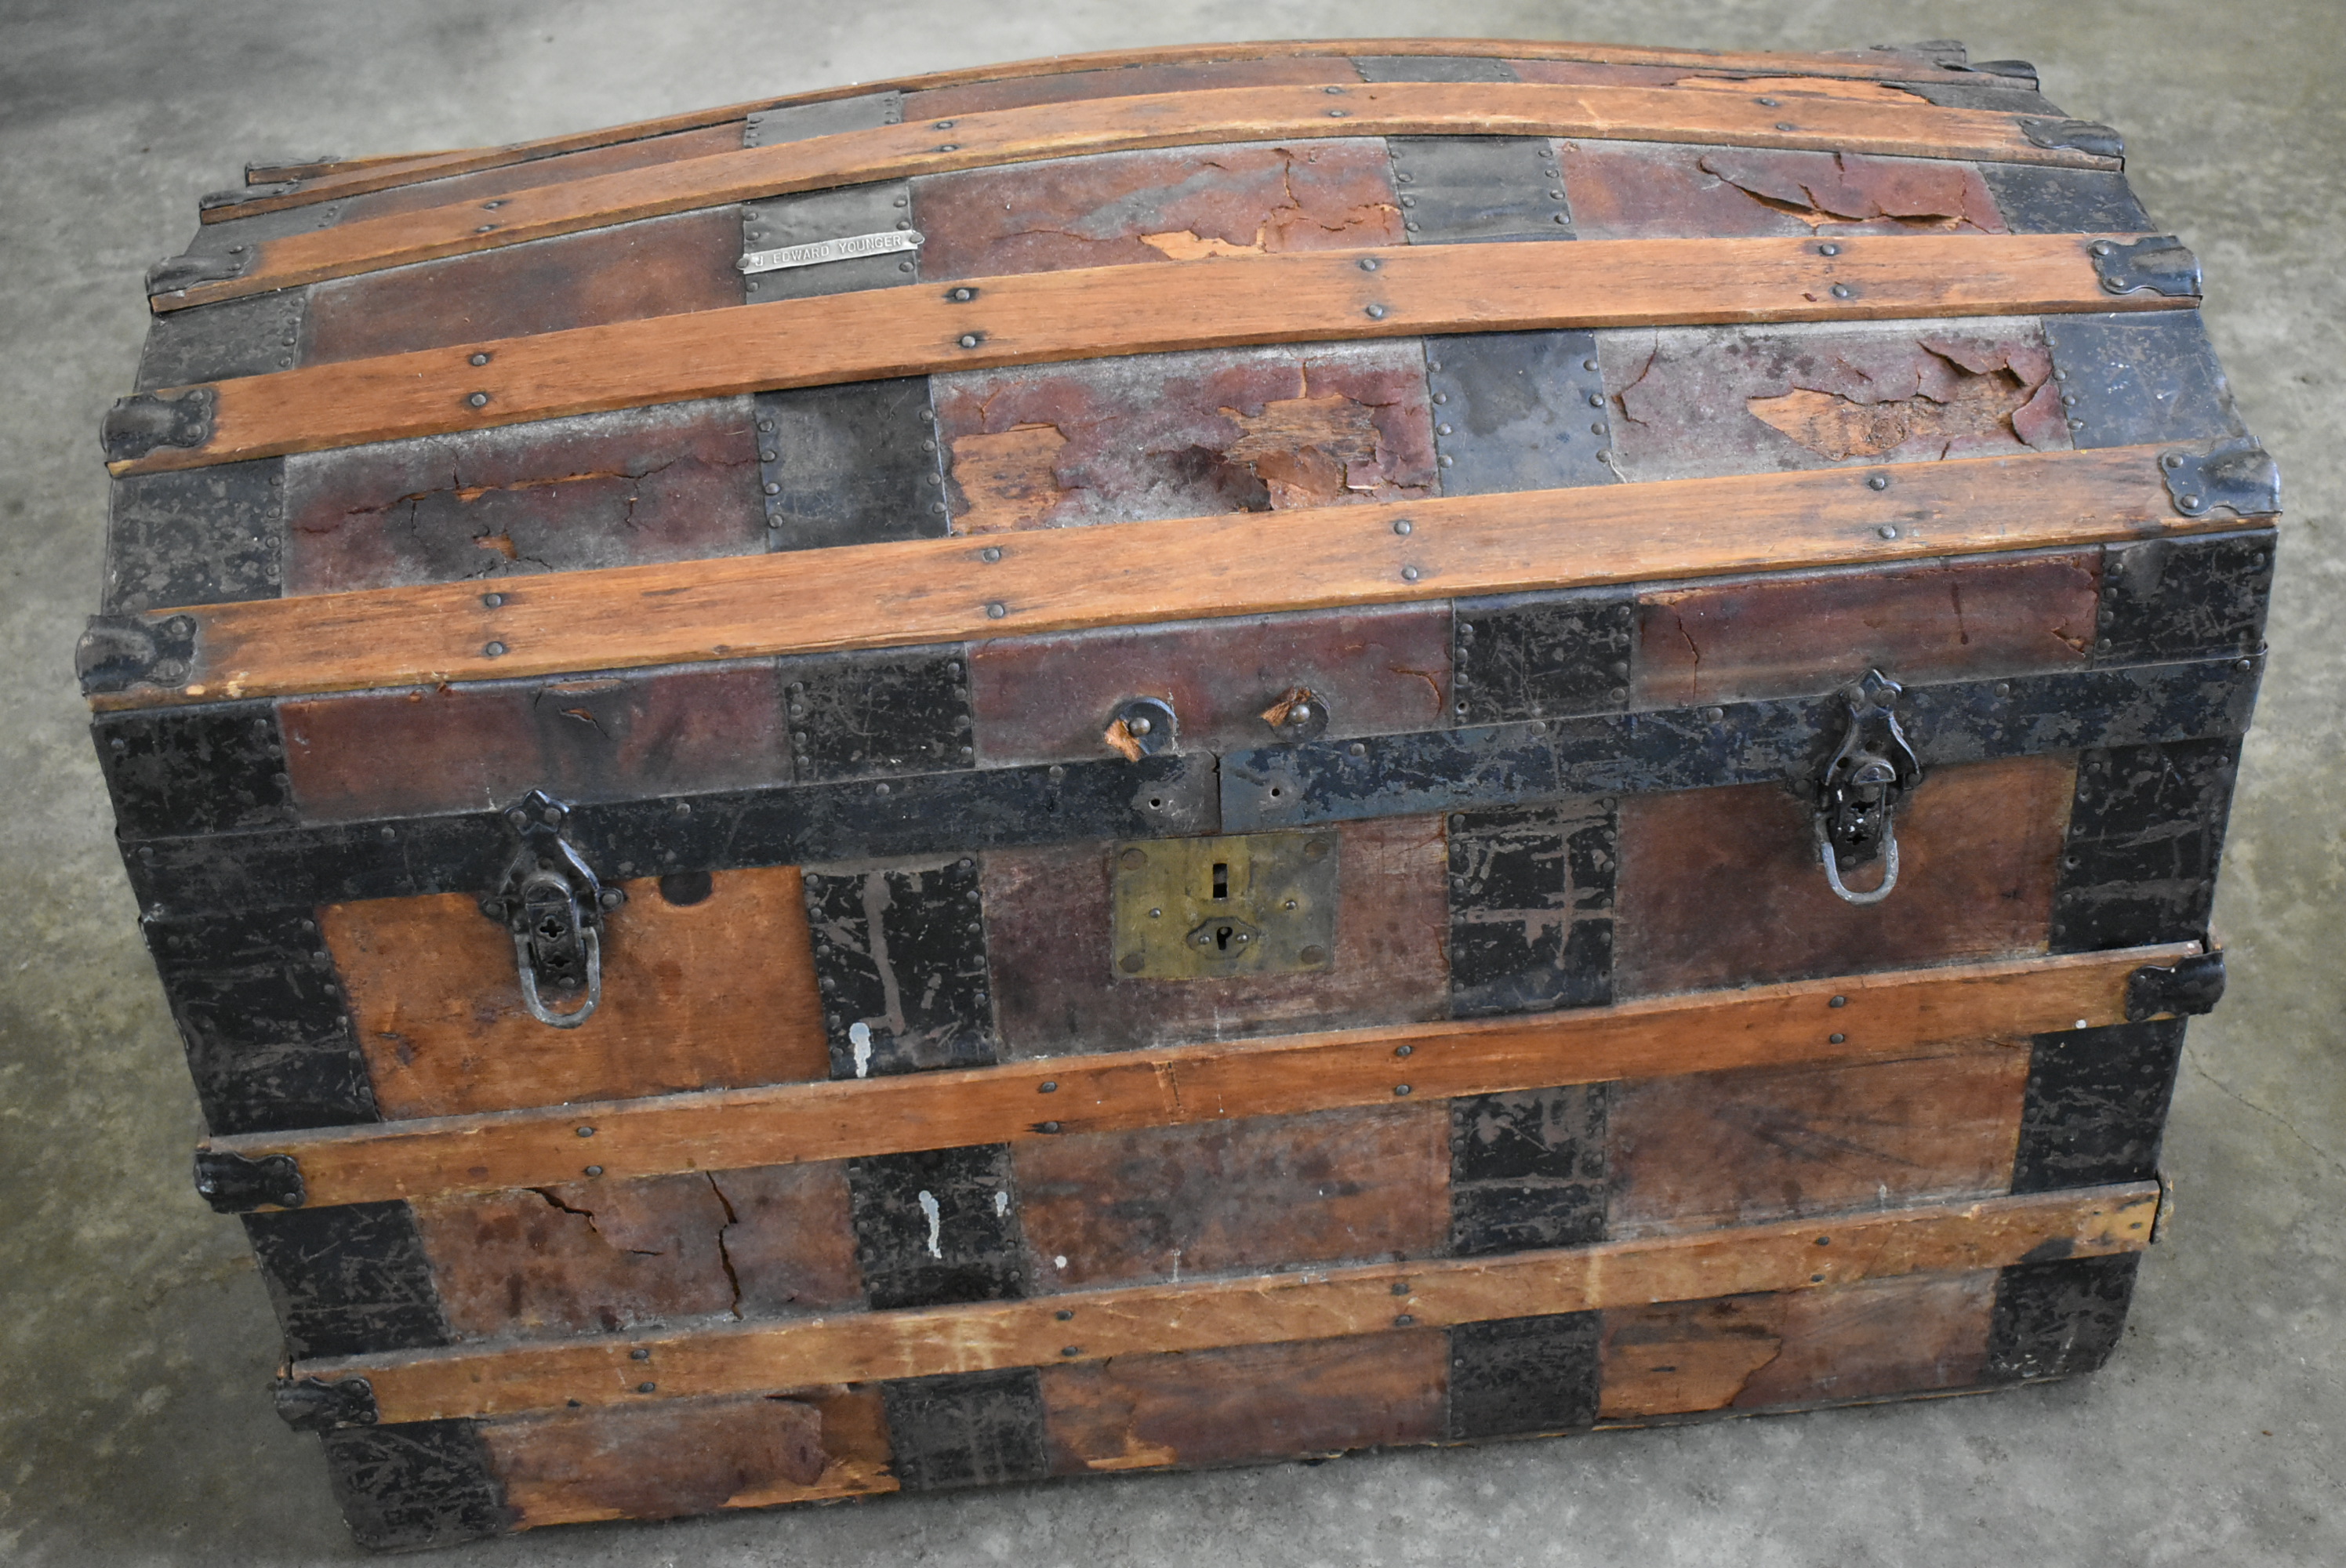 Sold at Auction: A large antique steamer trunk